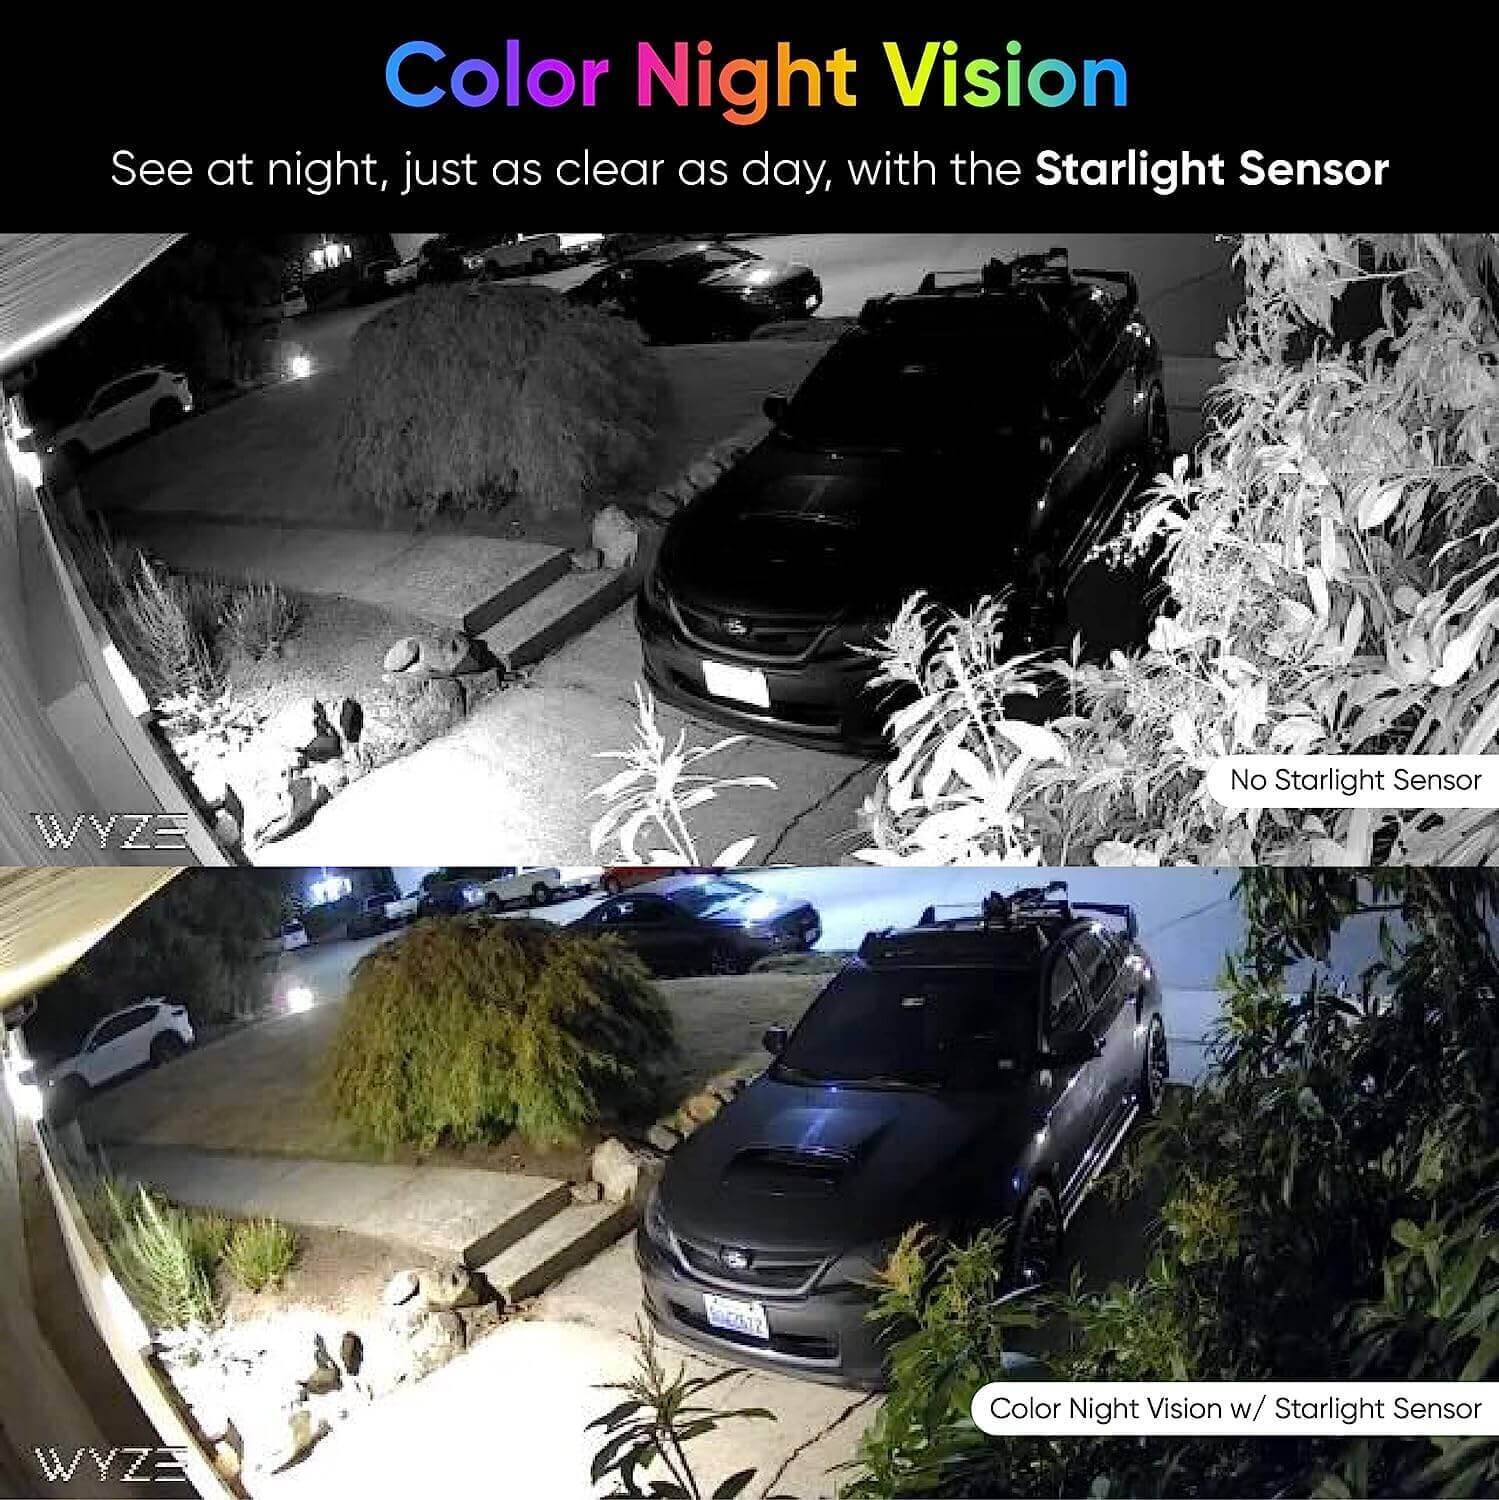 Color Night Vision with Starlight Sensor